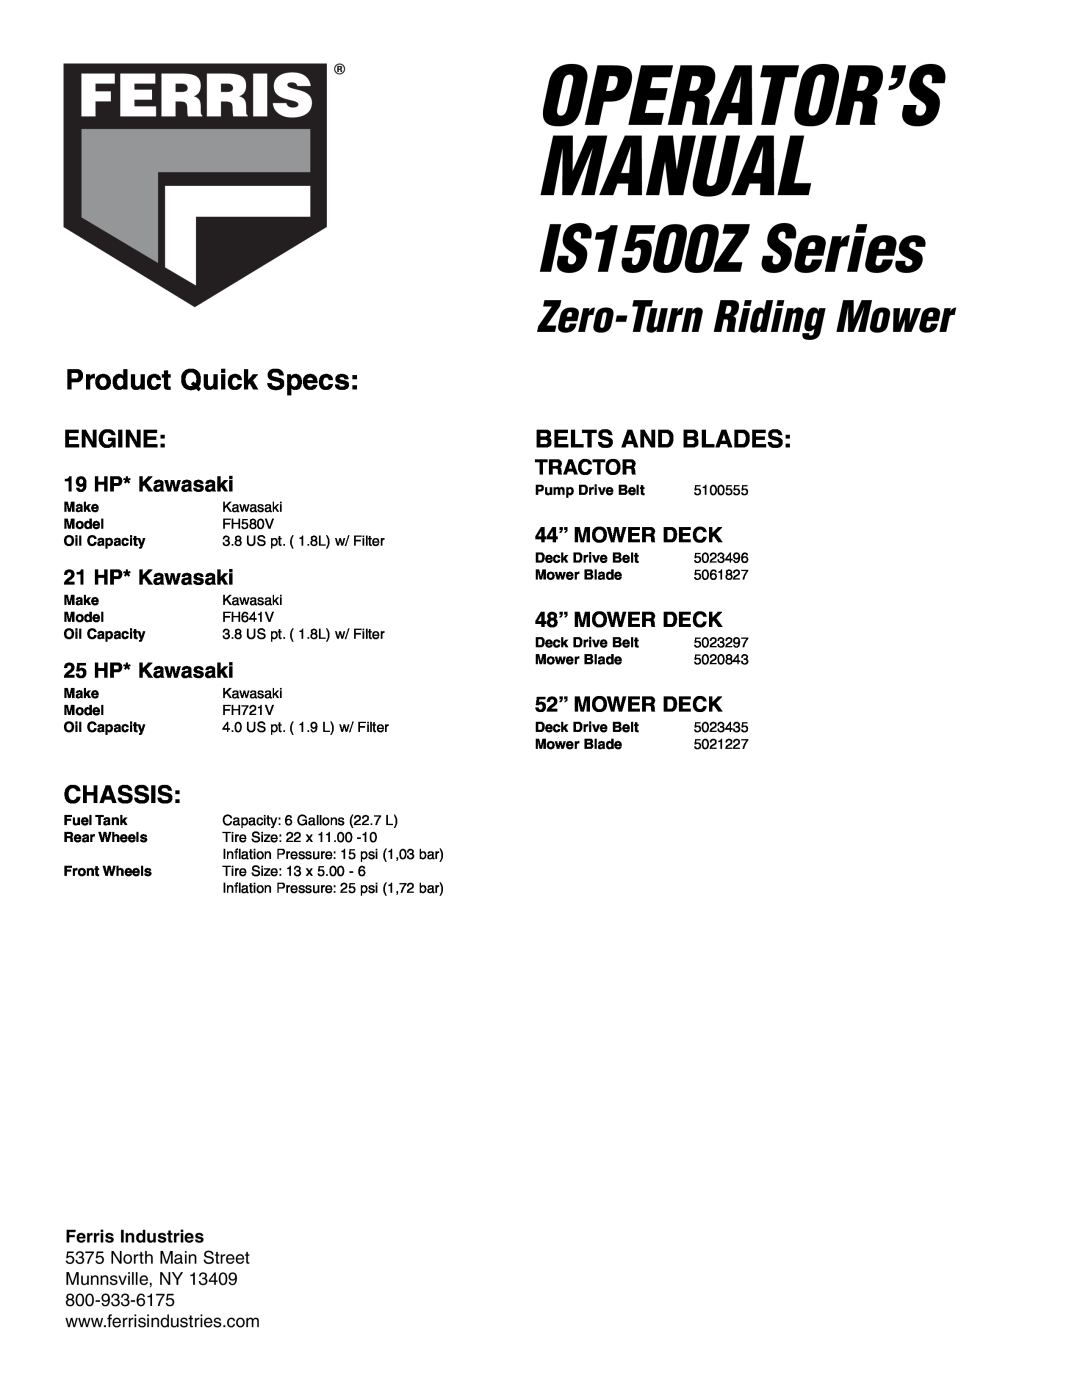 Ferris Industries Product Quick Specs, Belts And Blades, IS1500Z Series, Operator’S Manual, Zero-Turn Riding Mower 